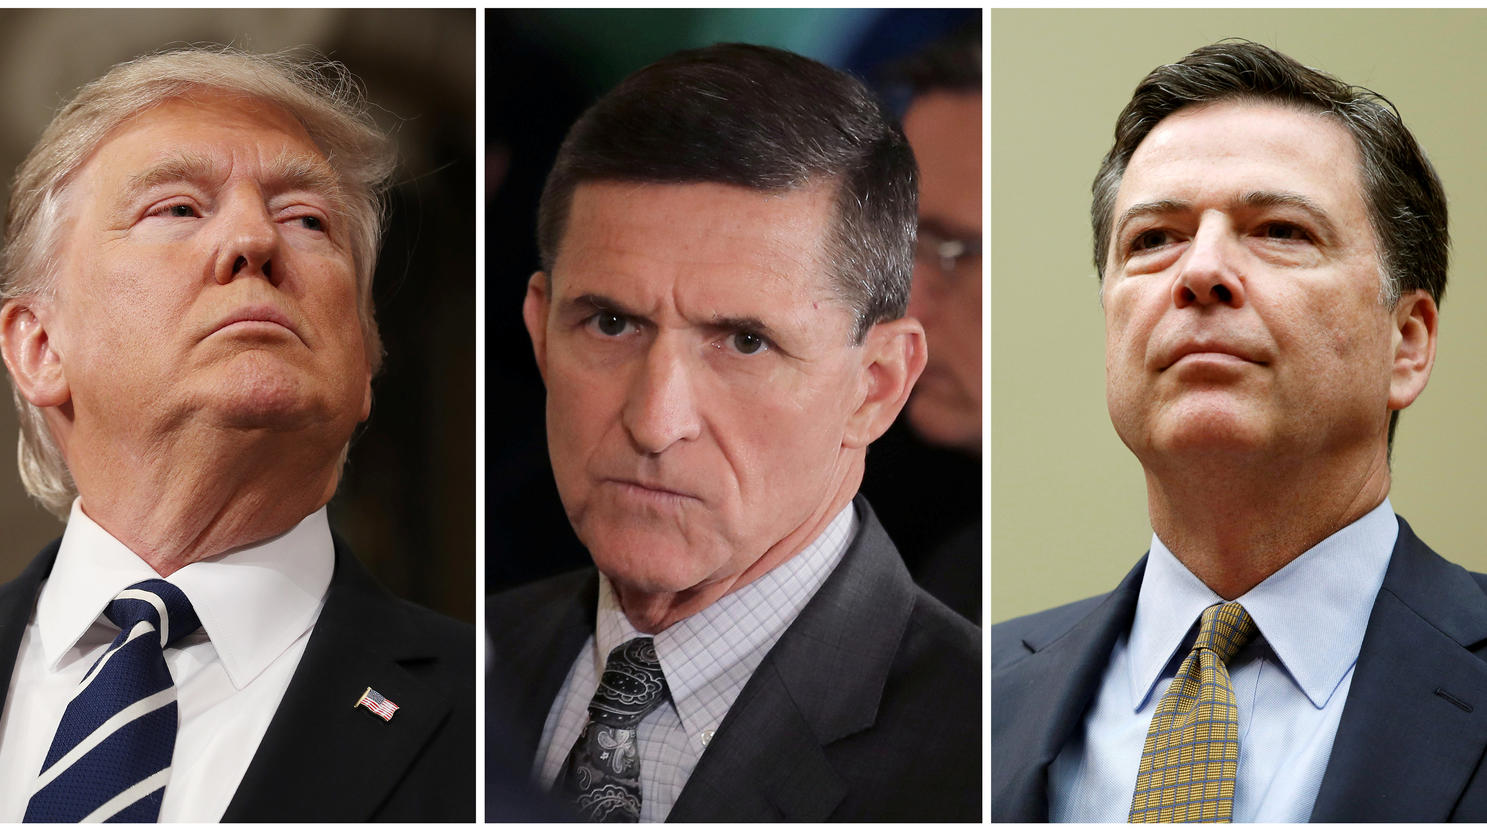 FILE PHOTO: A combination photo shows U.S. President Donald Trump (L), on February 28, 2017, White House National Security Advisor Michael Flynn (C), February 13, 2017 and FBI Director James Comey in Washington U.S. on July 7, 2016.   REUTERS/Jim Lo 